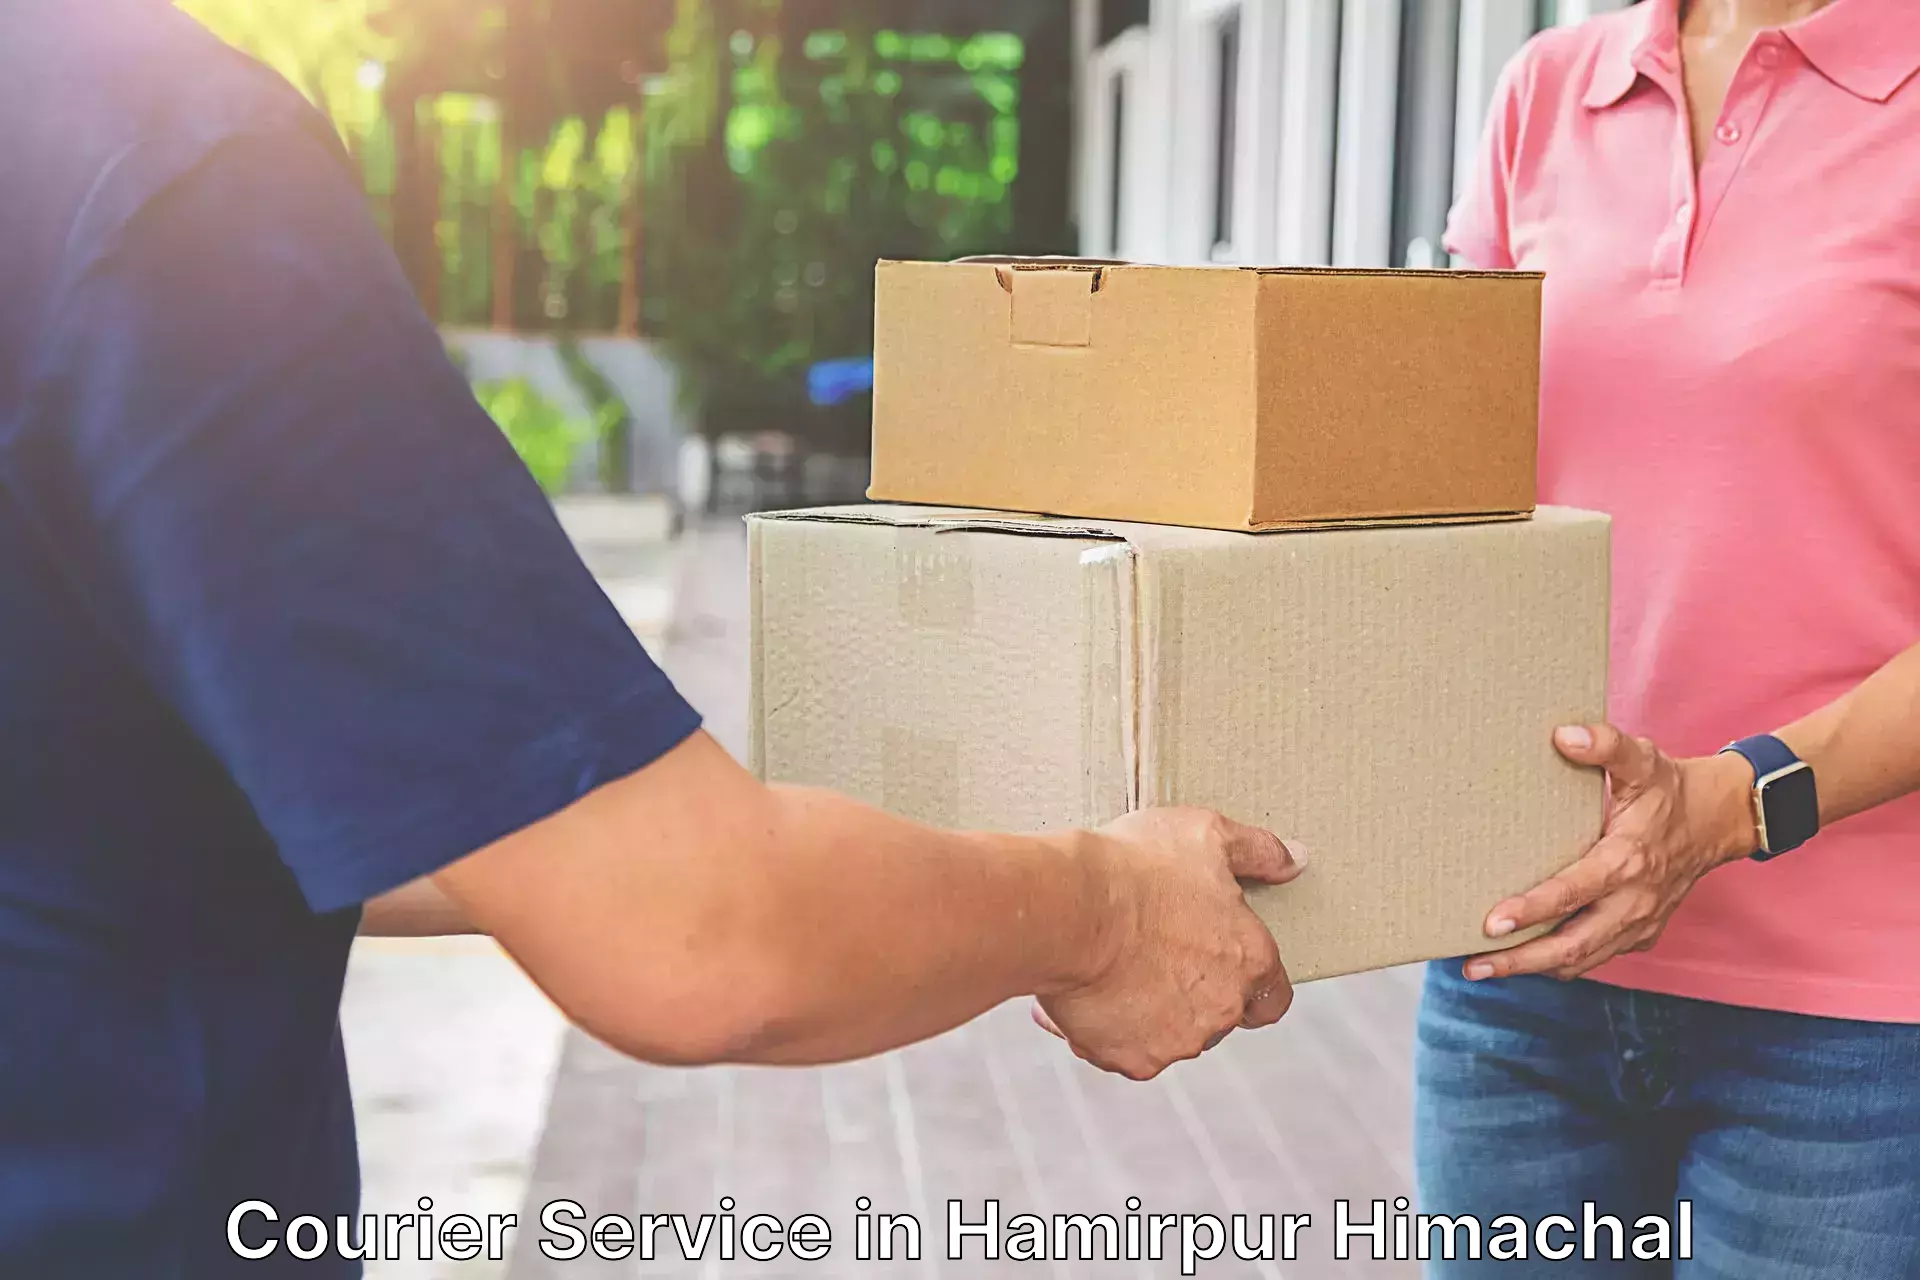 Quality courier partnerships in Hamirpur Himachal